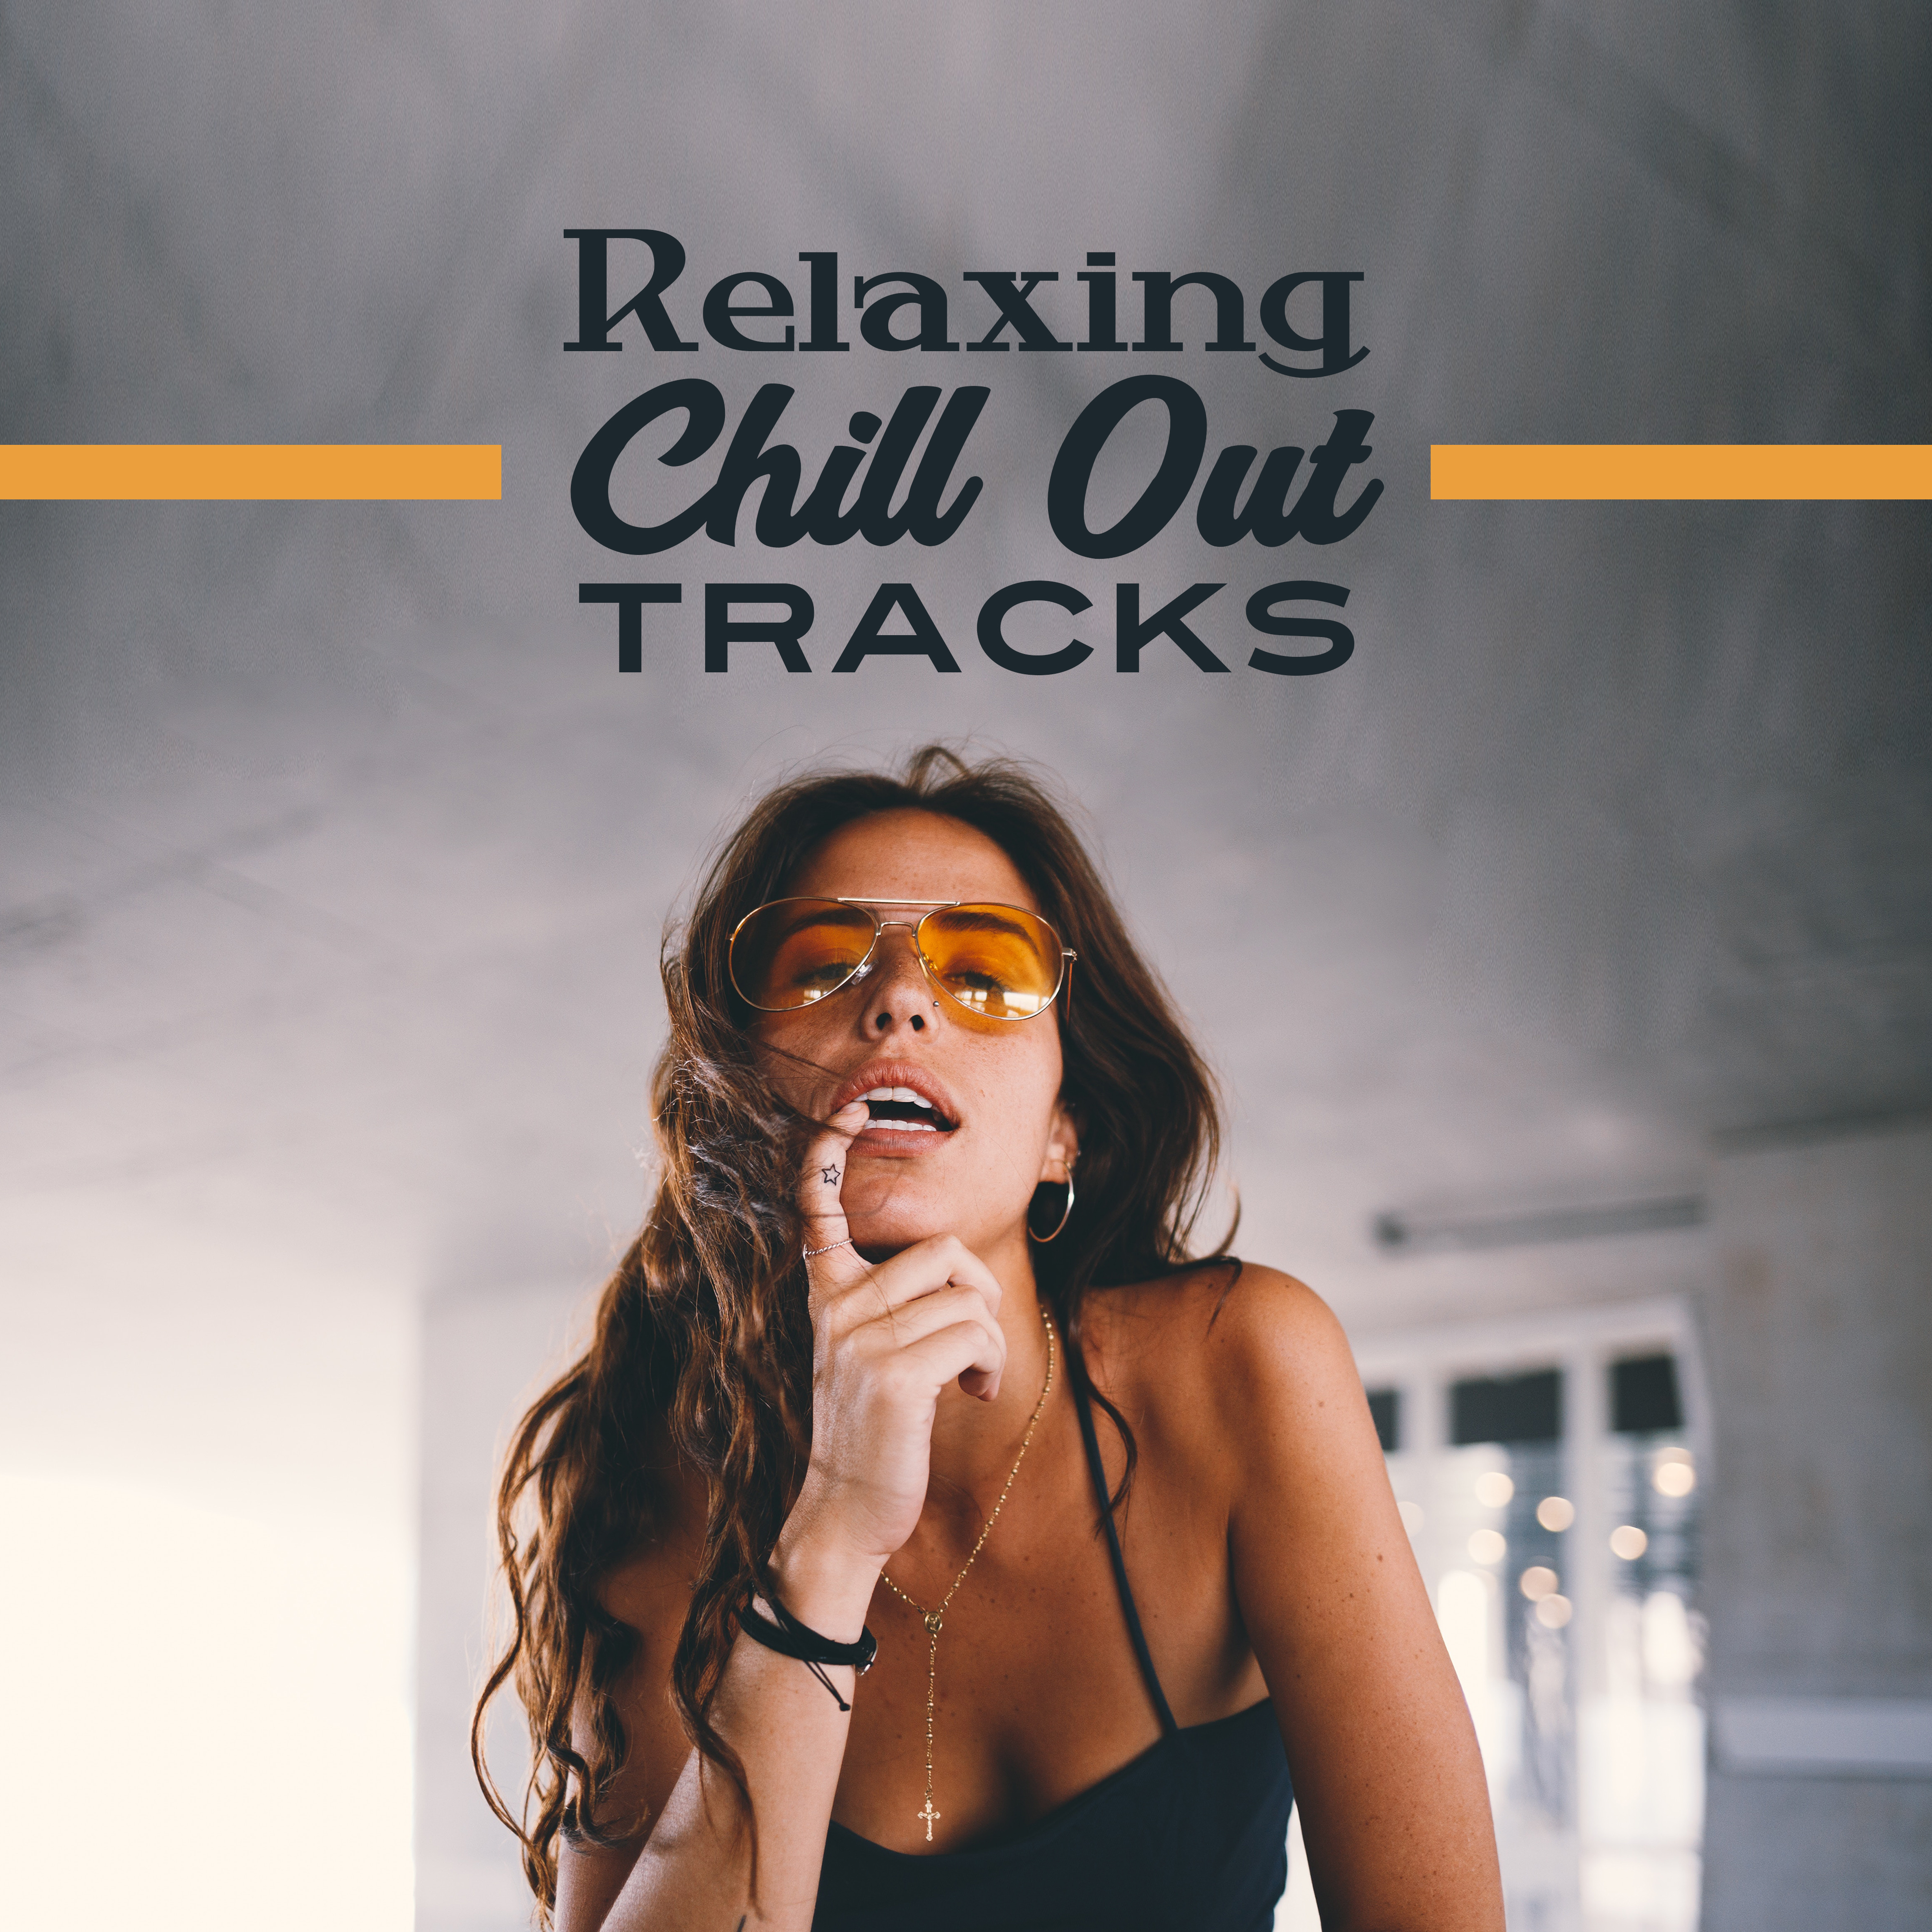 Relaxing Chill Out Tracks